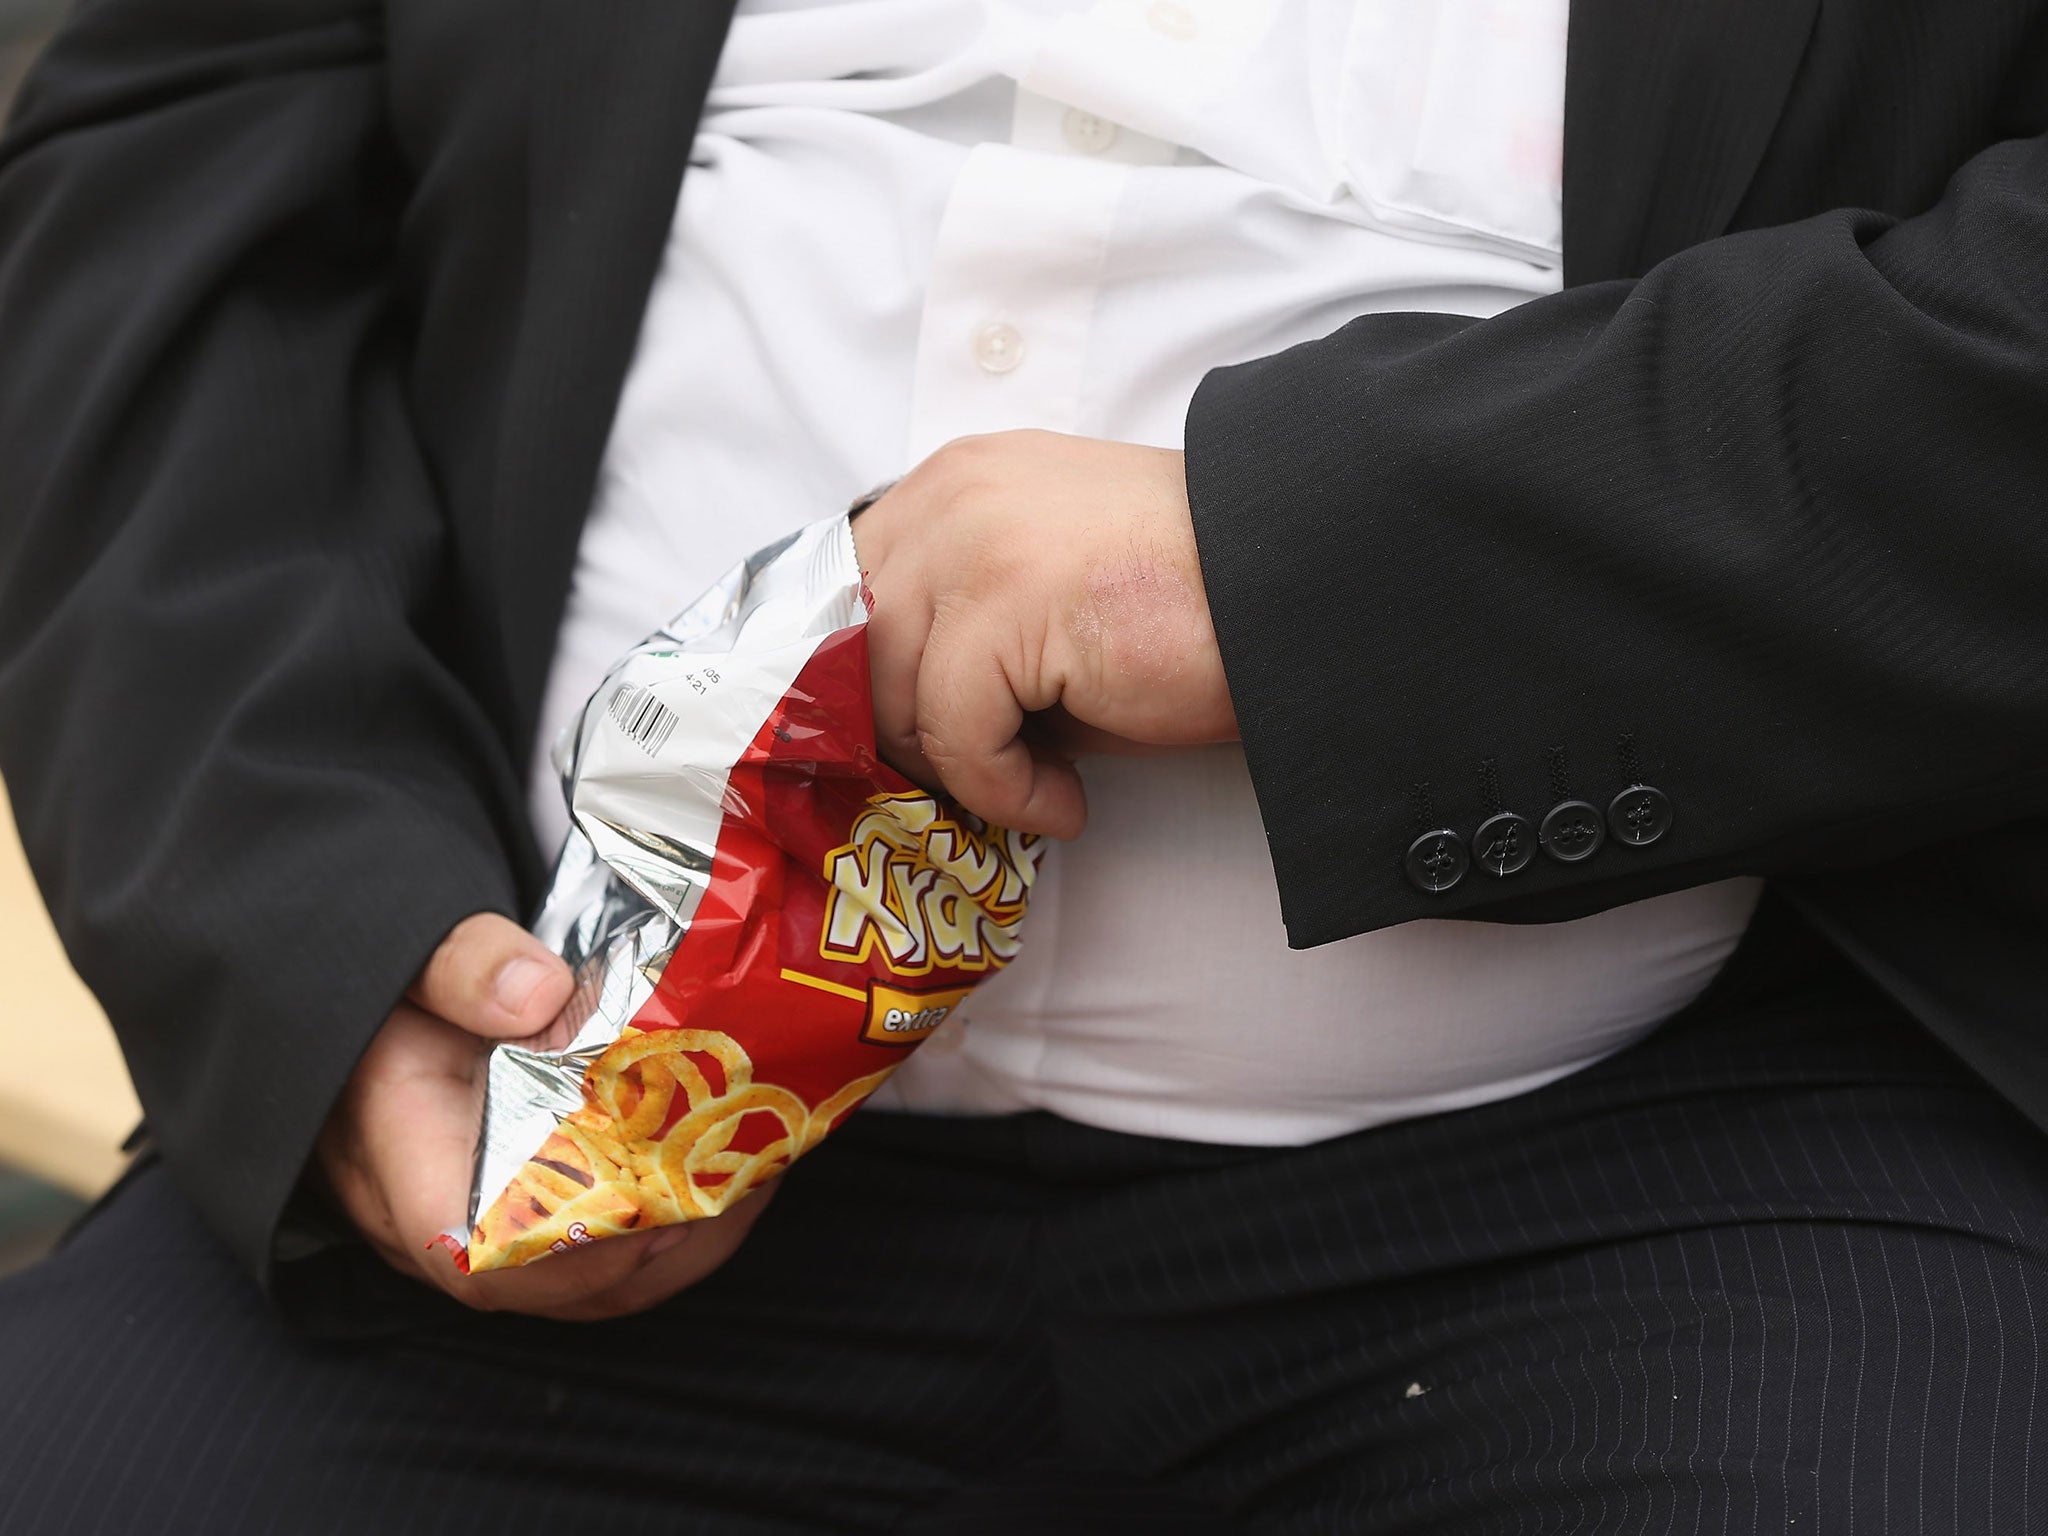 The cost of tackling obesity for the National Health Service is estimated at £5 billion